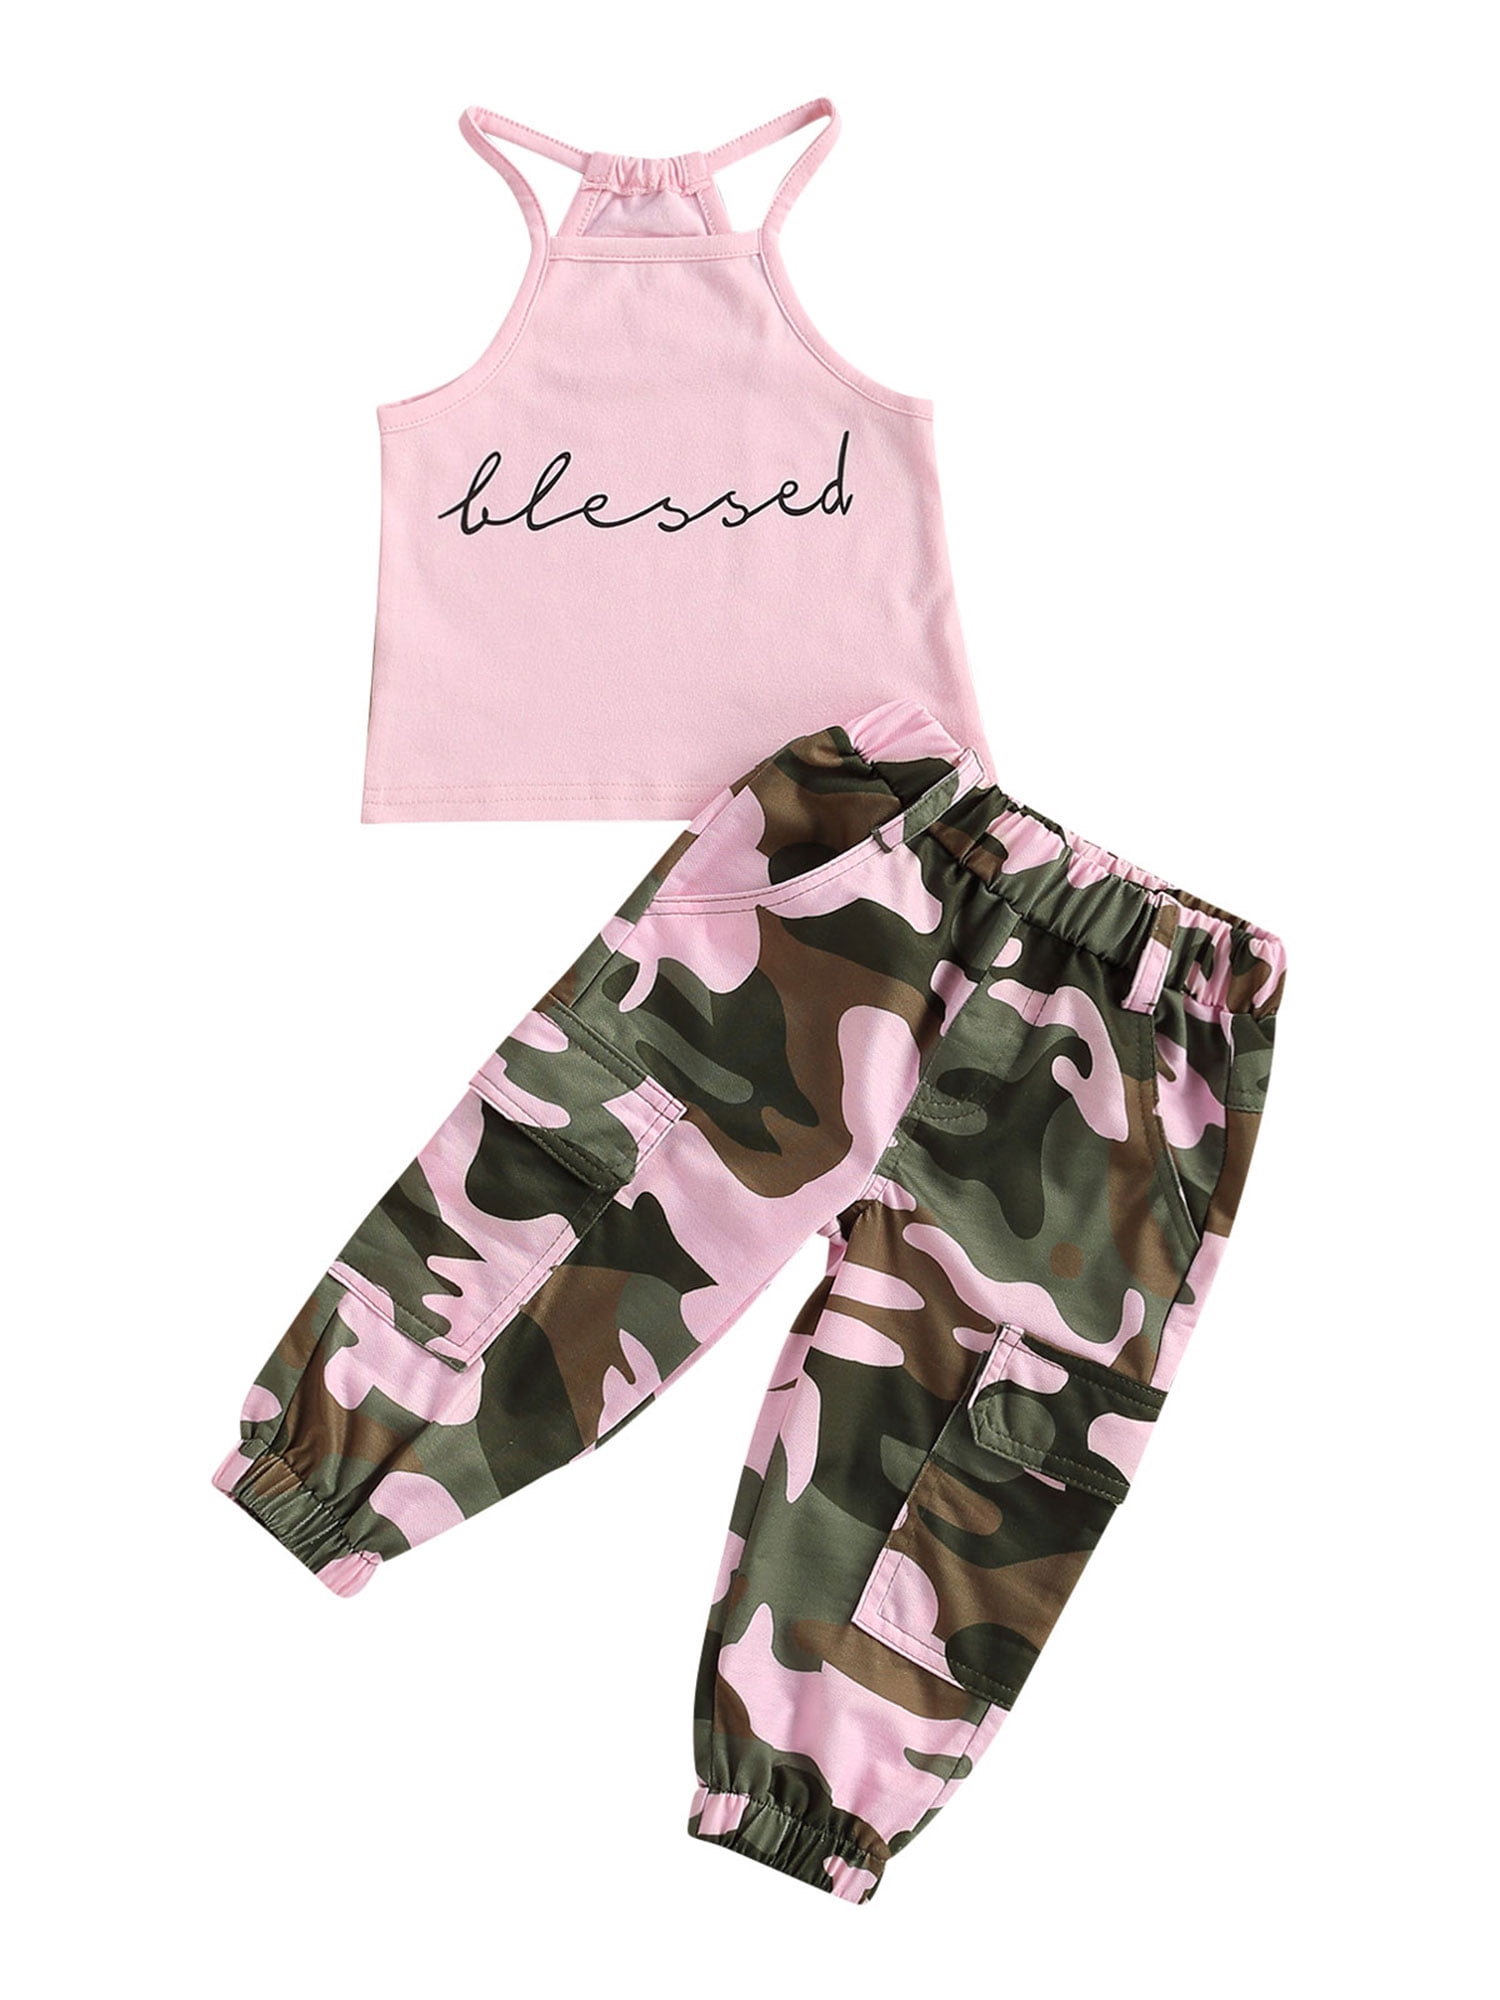 Plain Hot Pink Bodysuit Camouflage Girls Baby Dress Camo Trousers Outfit NB-18M 